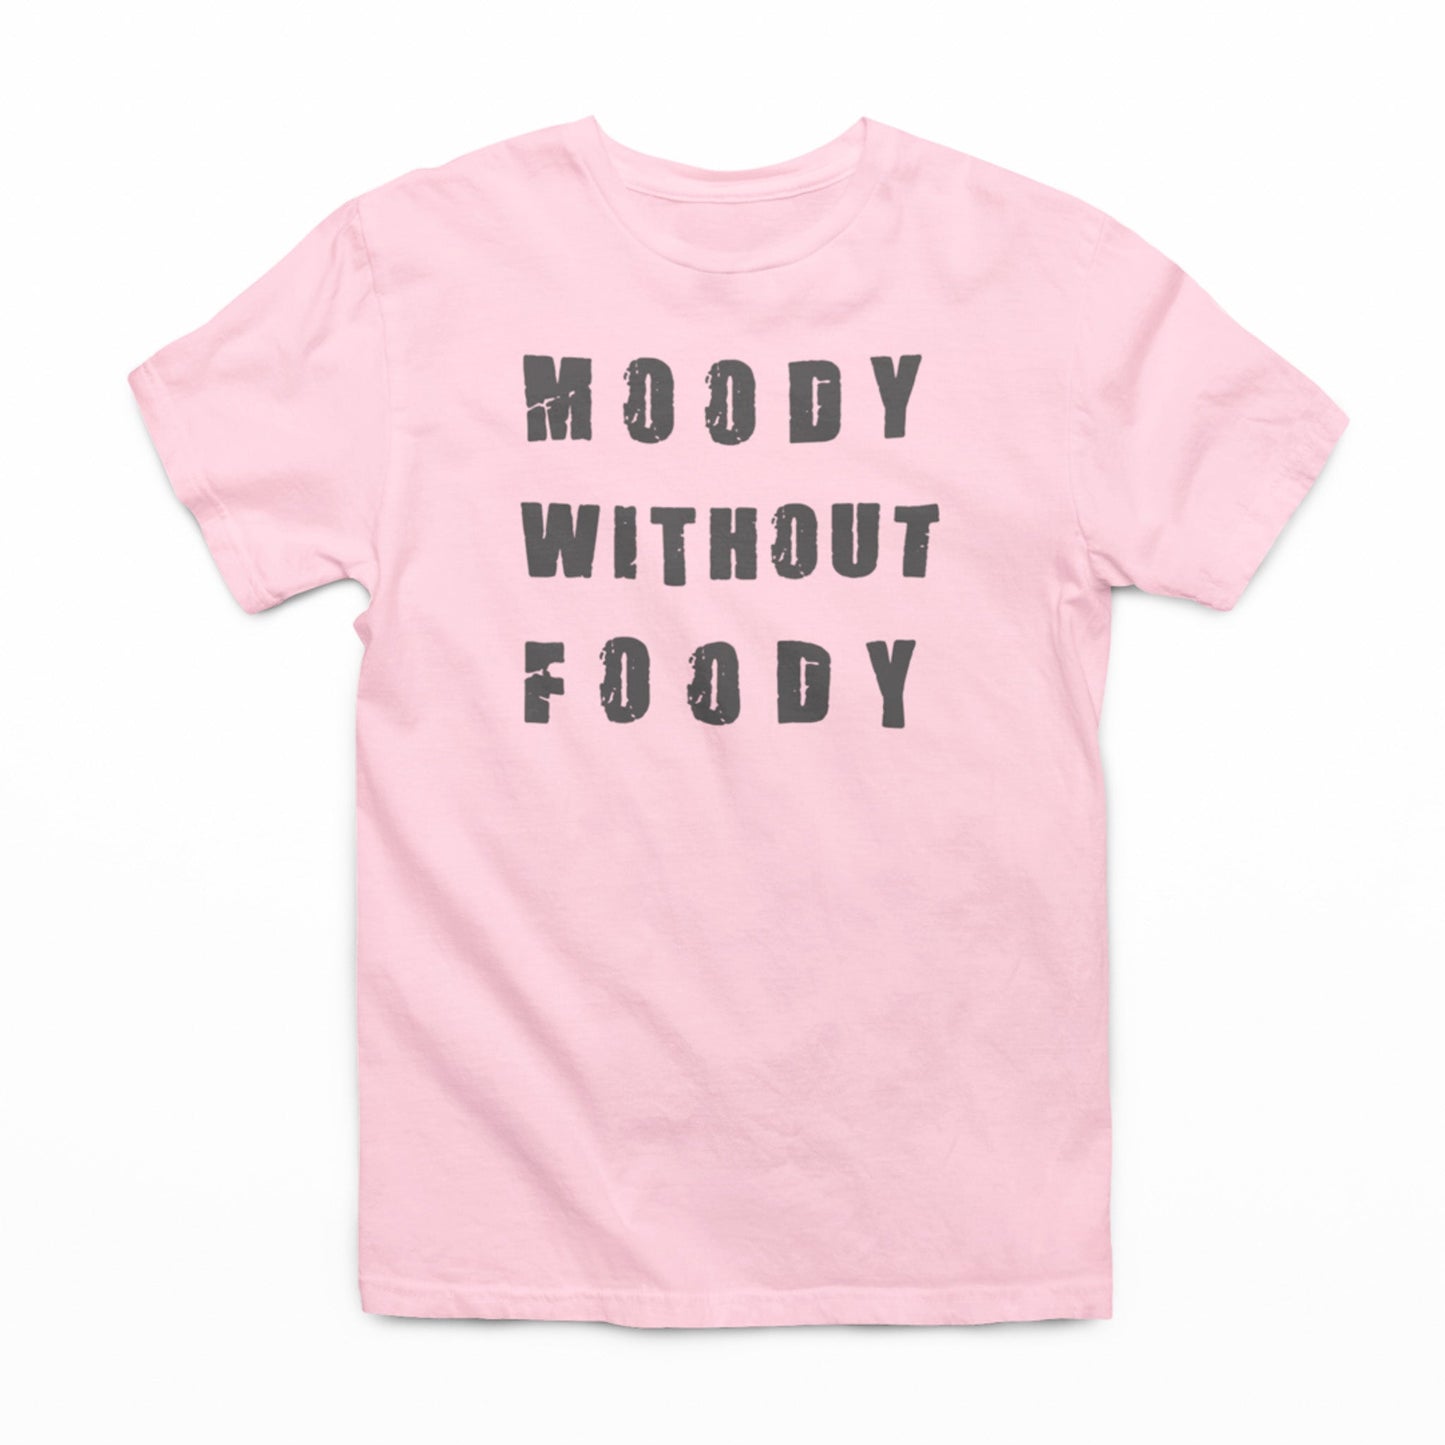 "A pink t-shirt laid out on a white background, featuring the phrase 'MOODY WITHOUT FOODY' in large, grey, distressed font. The shirt is unadorned otherwise, with a crew neckline and short sleeves, emphasizing the message as the focal point."